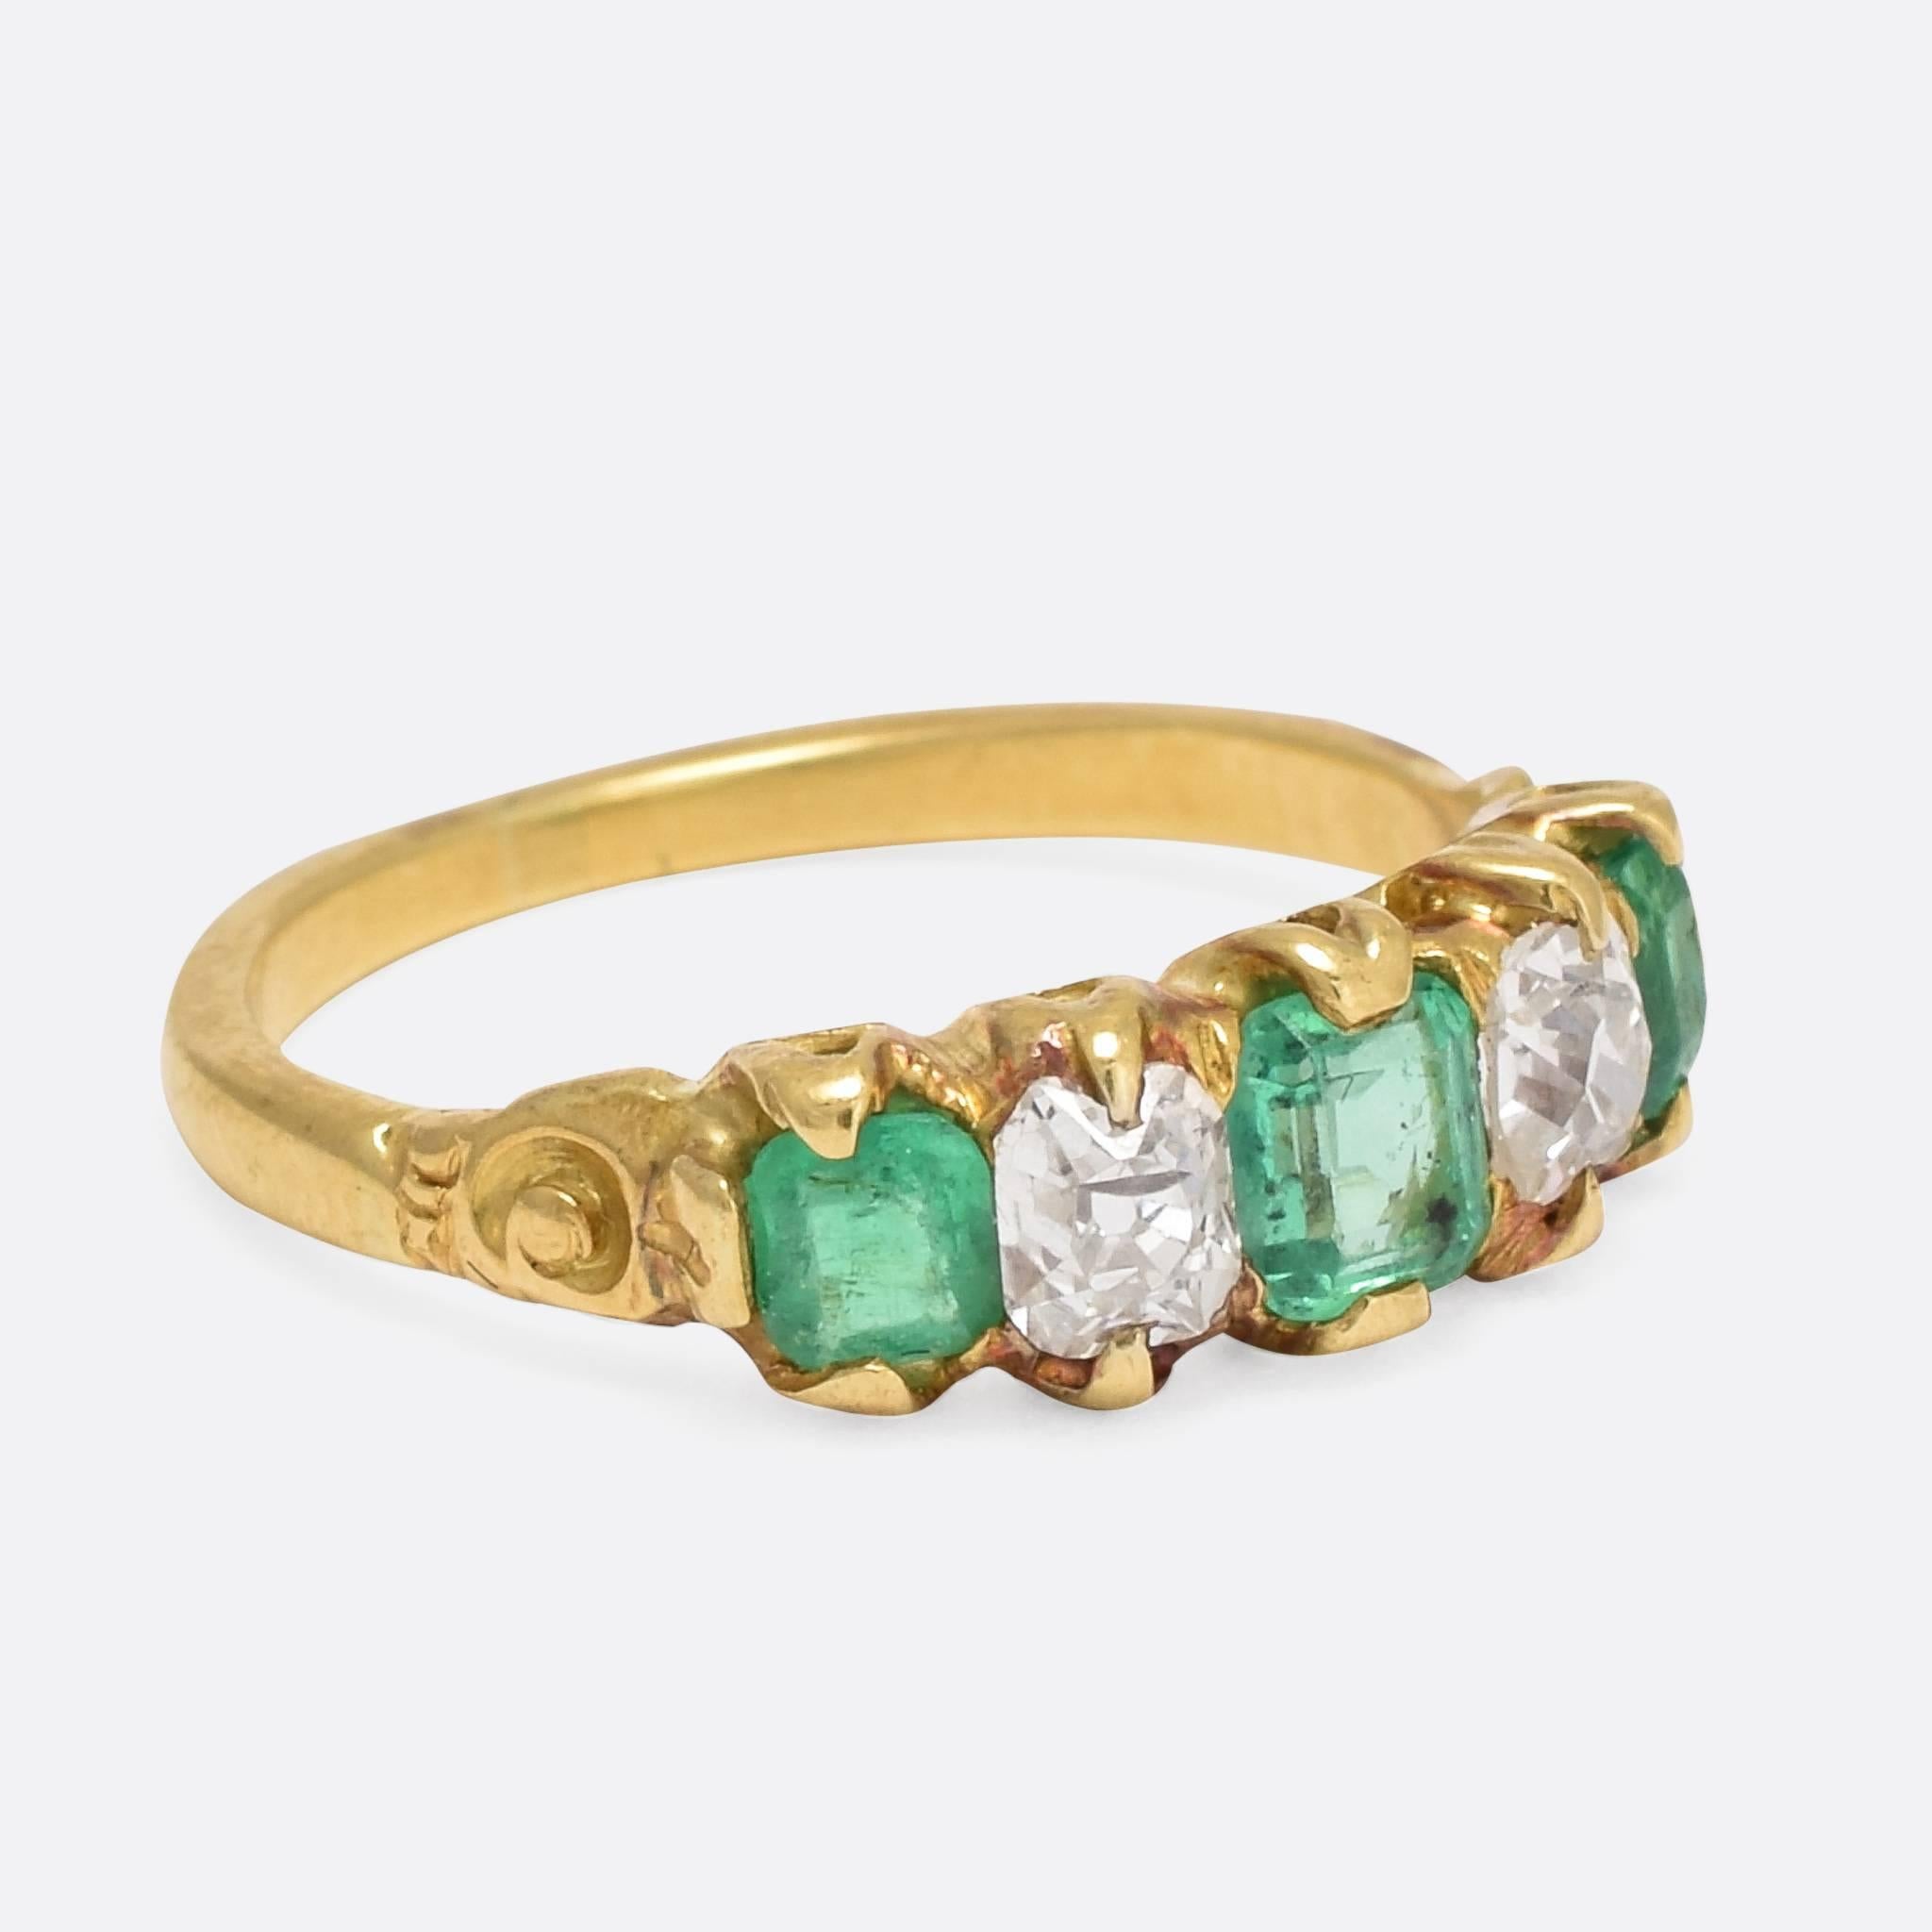 This splendid antique five-stone ring is set with three vibrant emeralds and two old mine cut diamonds. Modelled in rich 18ct yellow gold, the head displays pretty galleried sides, allowing in light behind the stones - while the shoulders feature